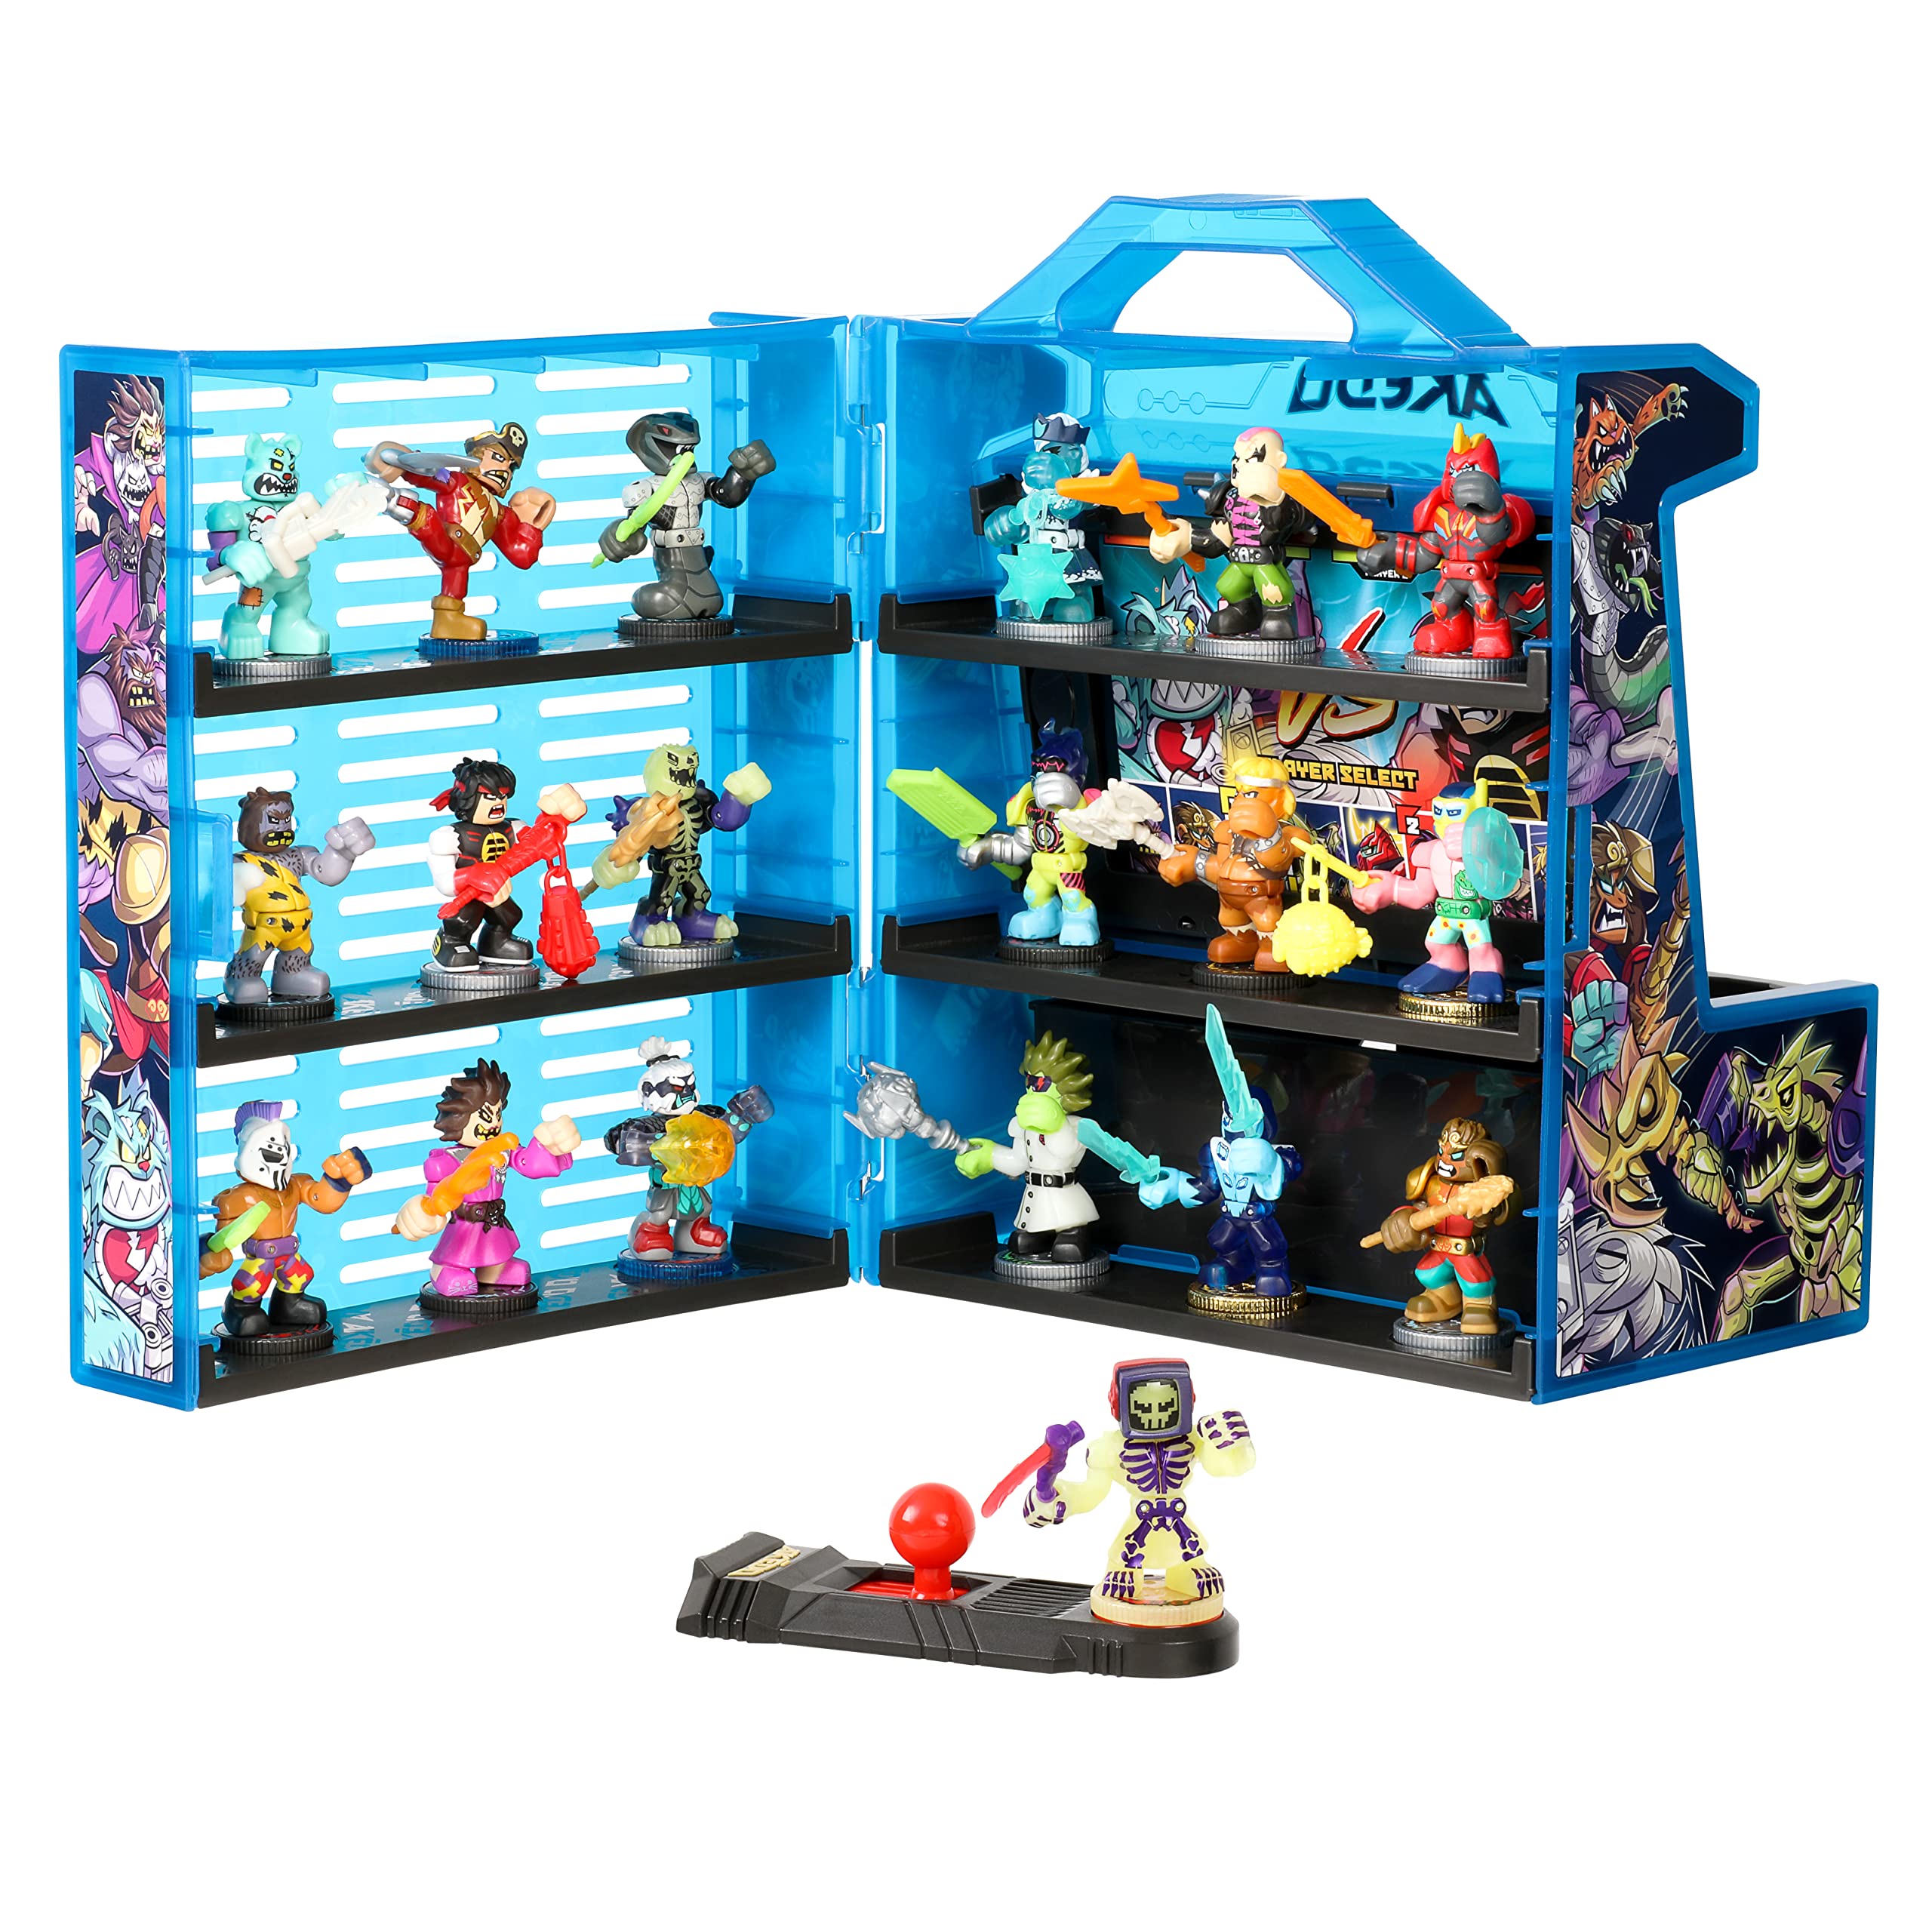 Akedo - Ultimate Arcade Warriors Collector Case Mini Battling Action Figures Ready, Fight, Split Strike,Multicolor,14241, For Ages 6+